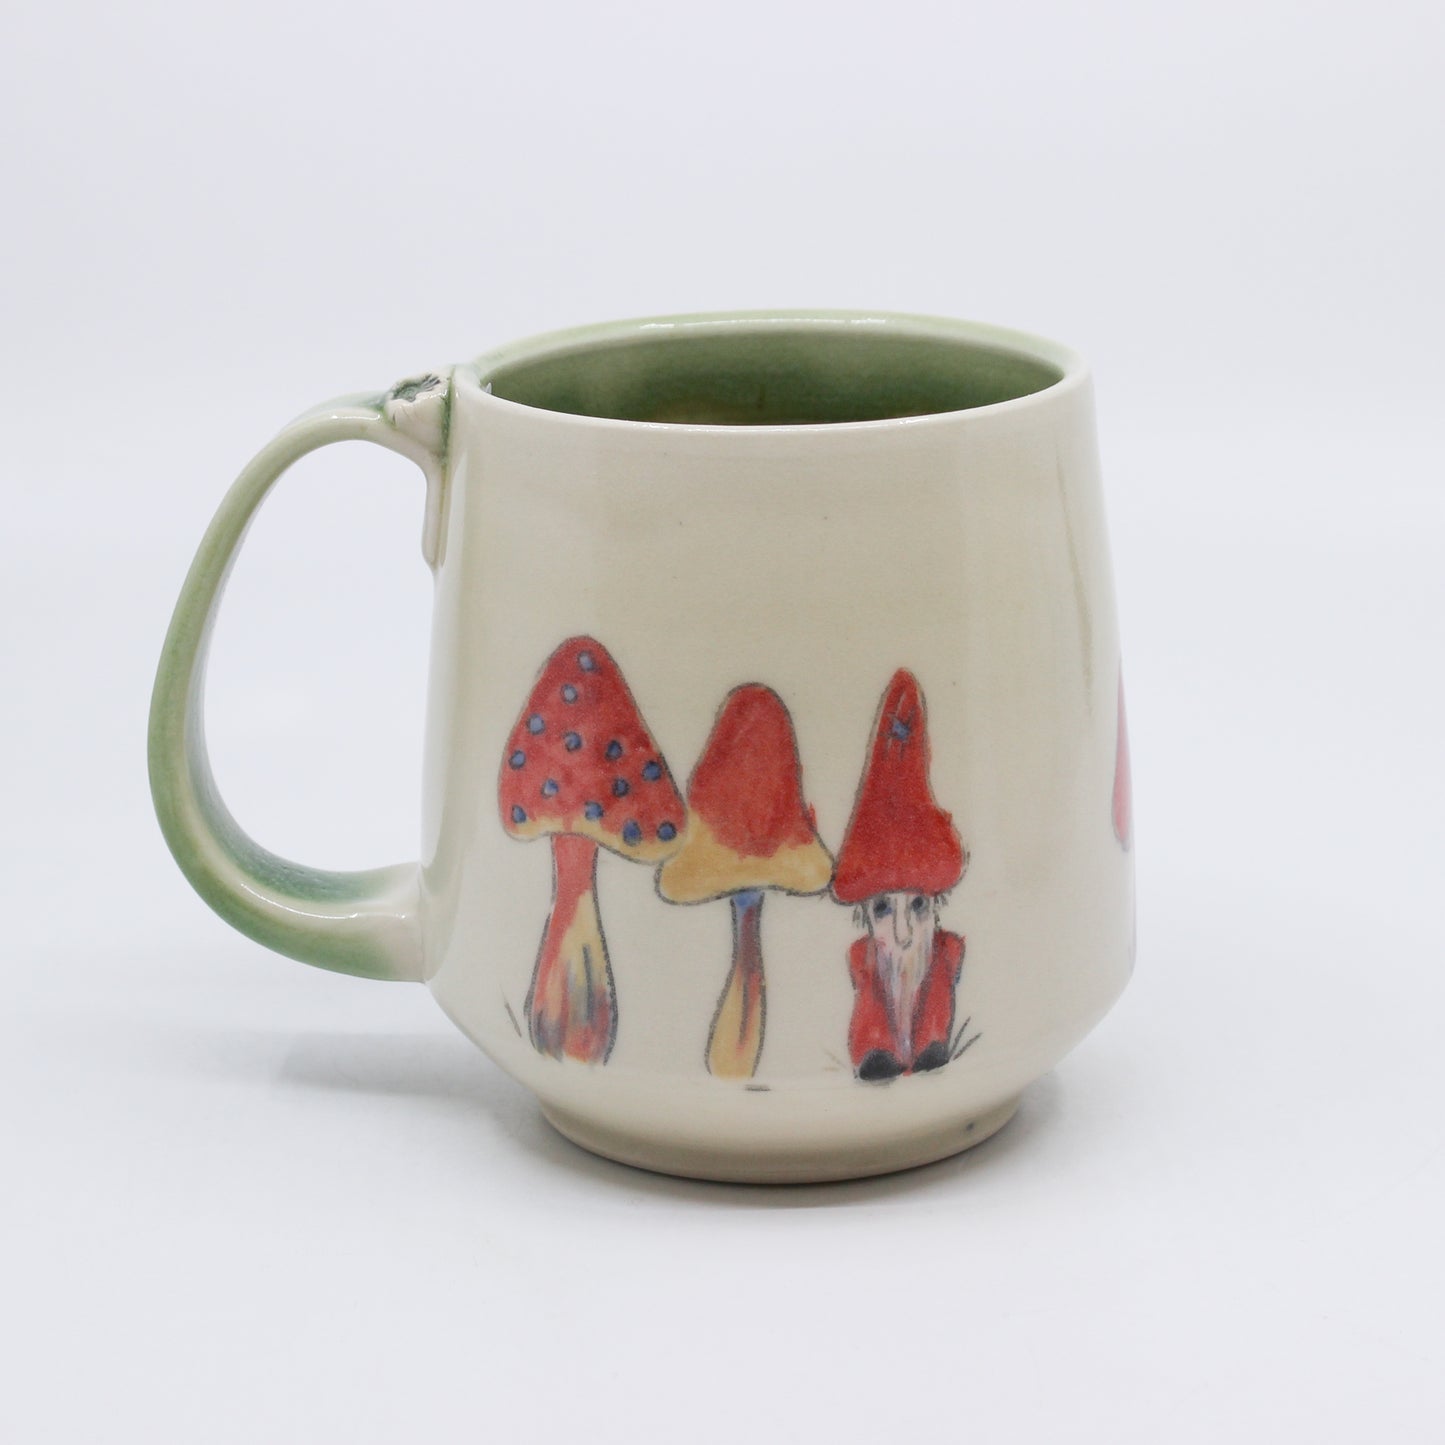 Hand-painted mushrooms with hiding gnome on white and green mug 